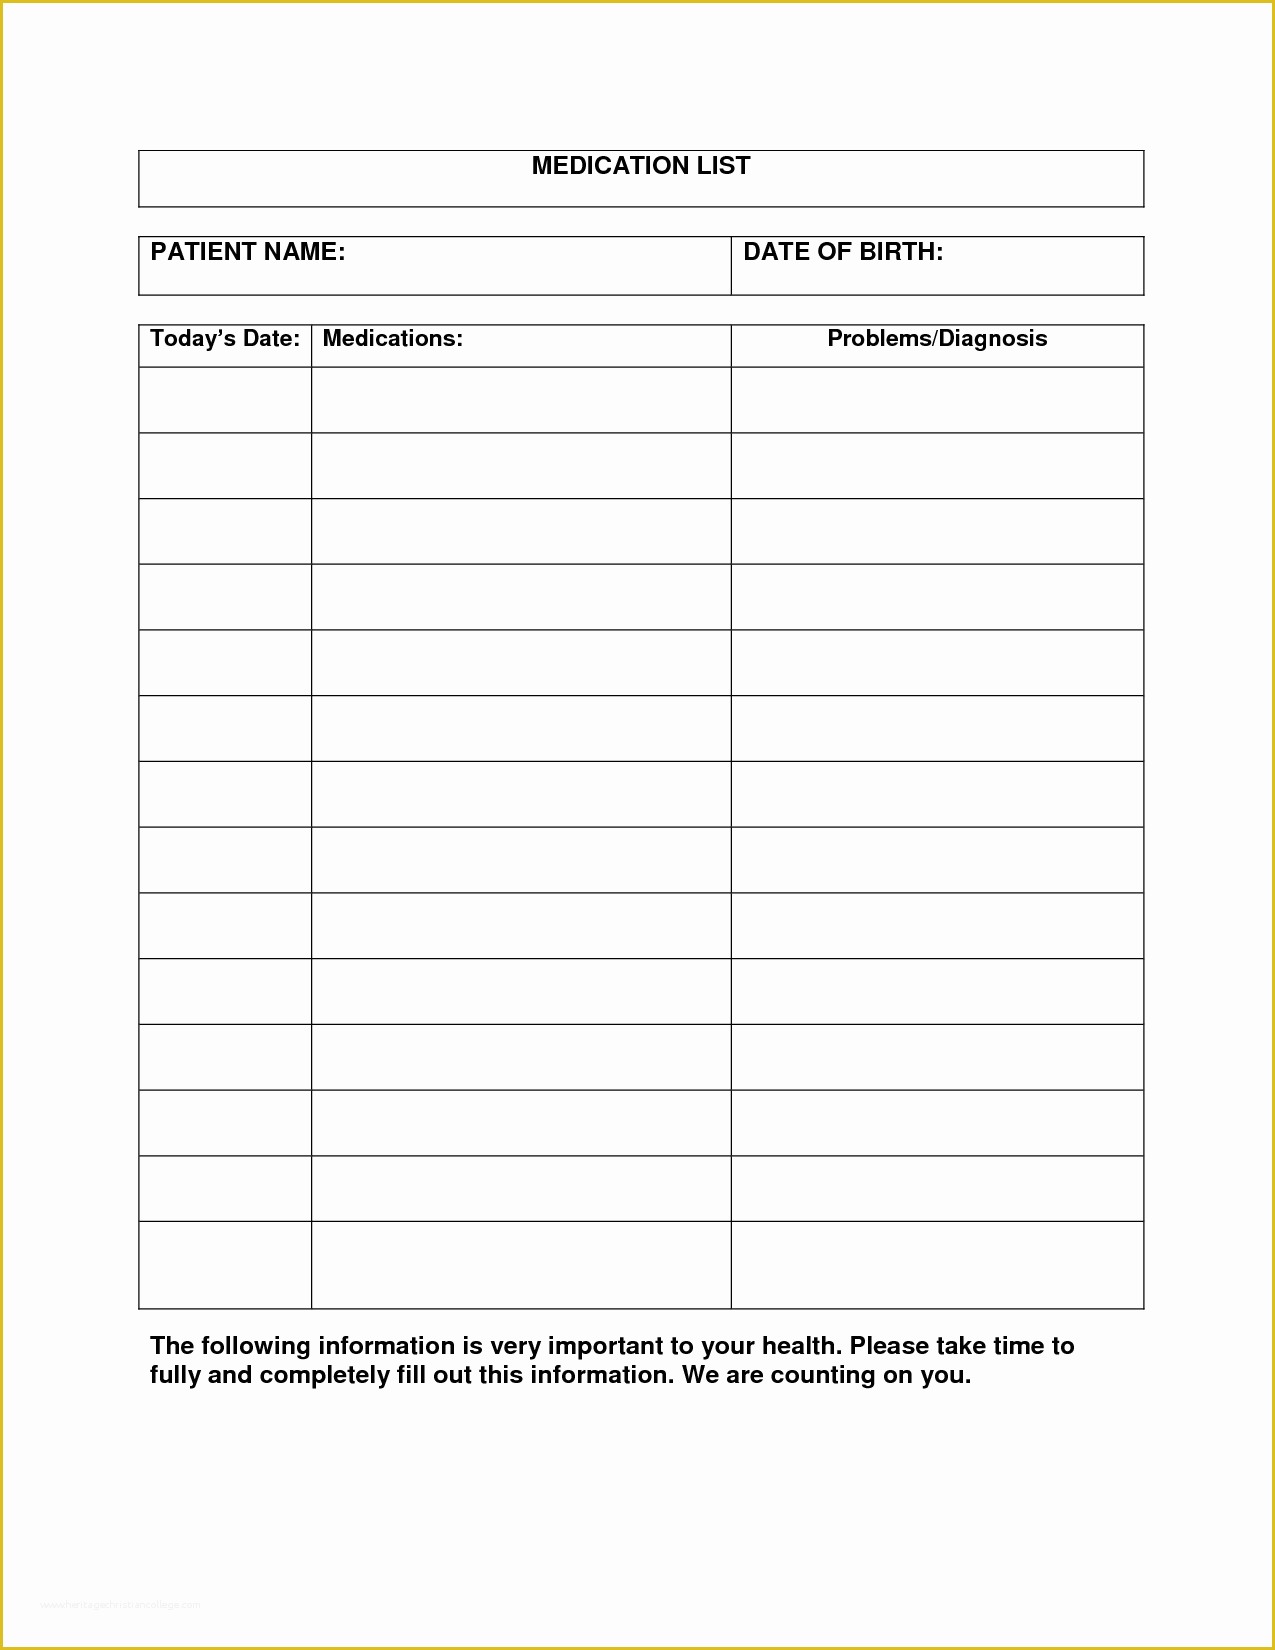 Free Medication Reconciliation Template Of Blank Template for Patient Medication to Pin On